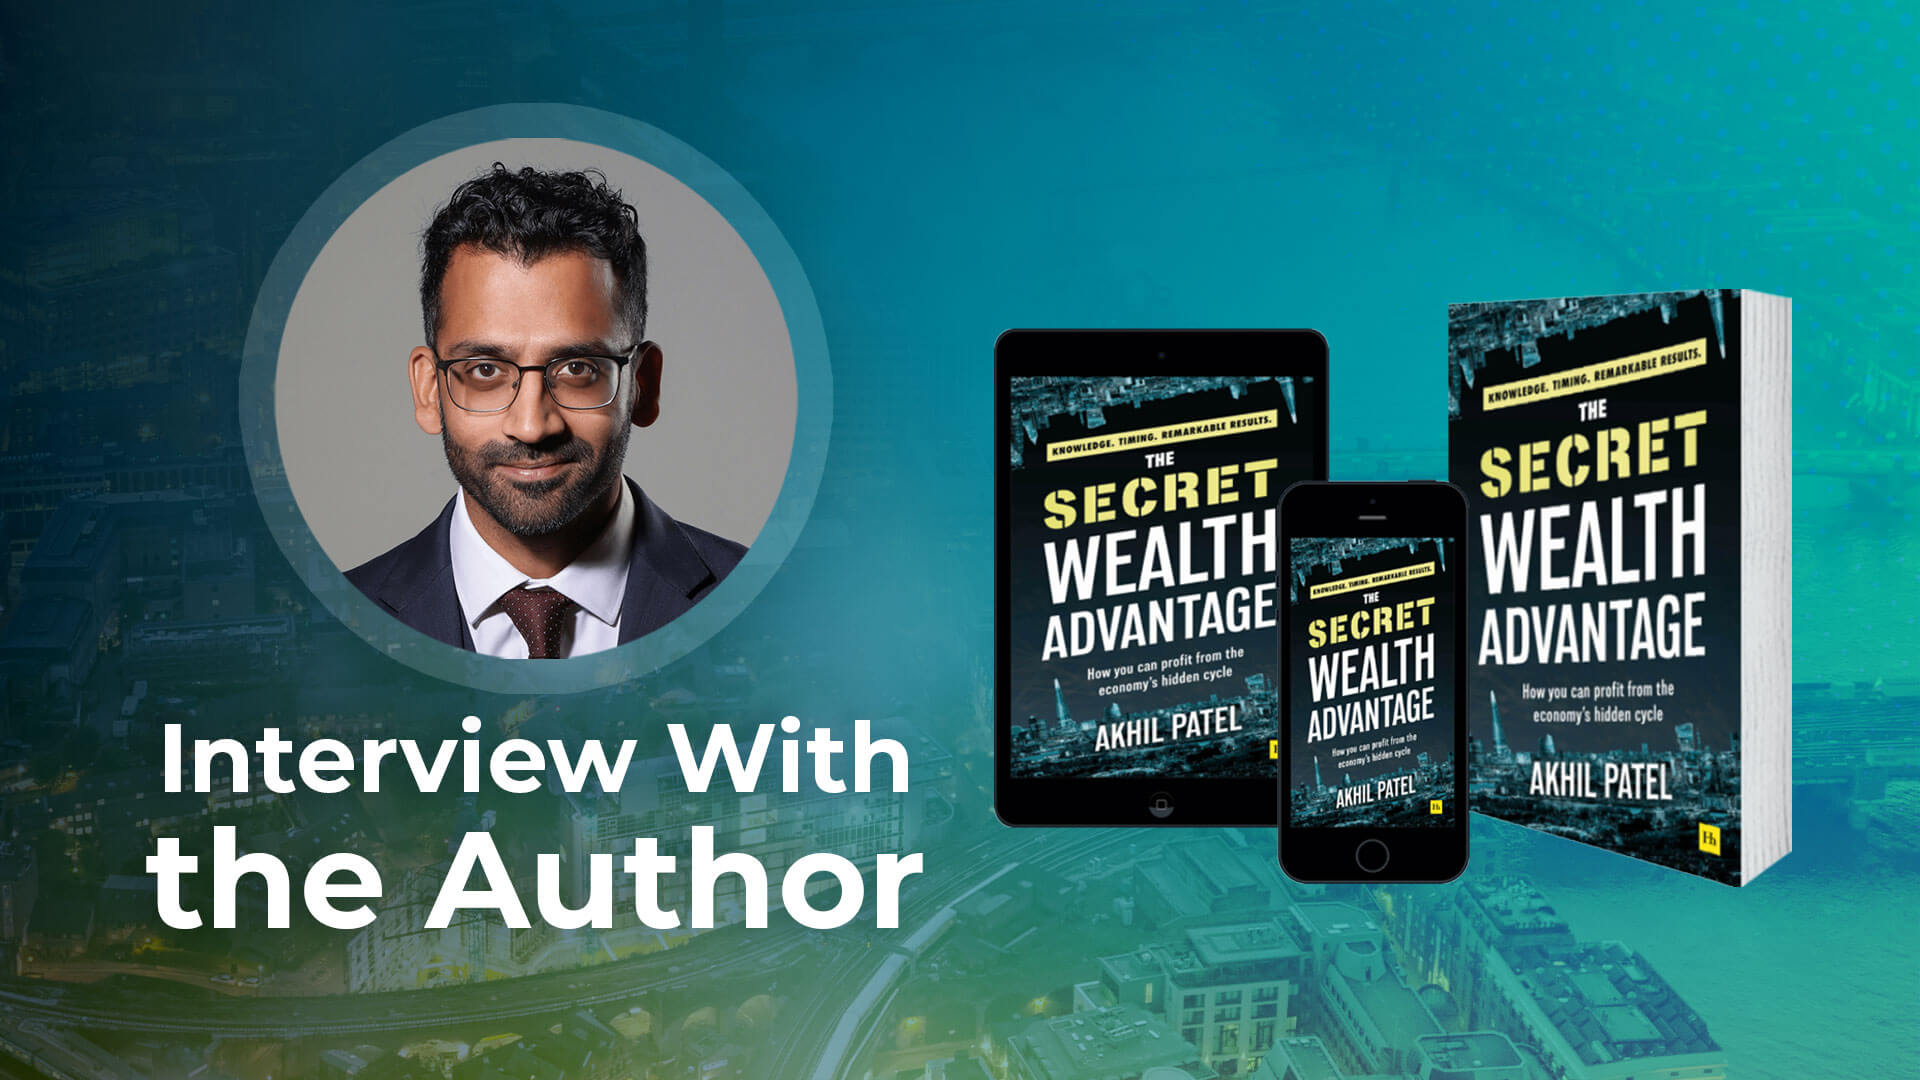 Interview with Akhil Patel - The Author of The Secret Wealth Advantage